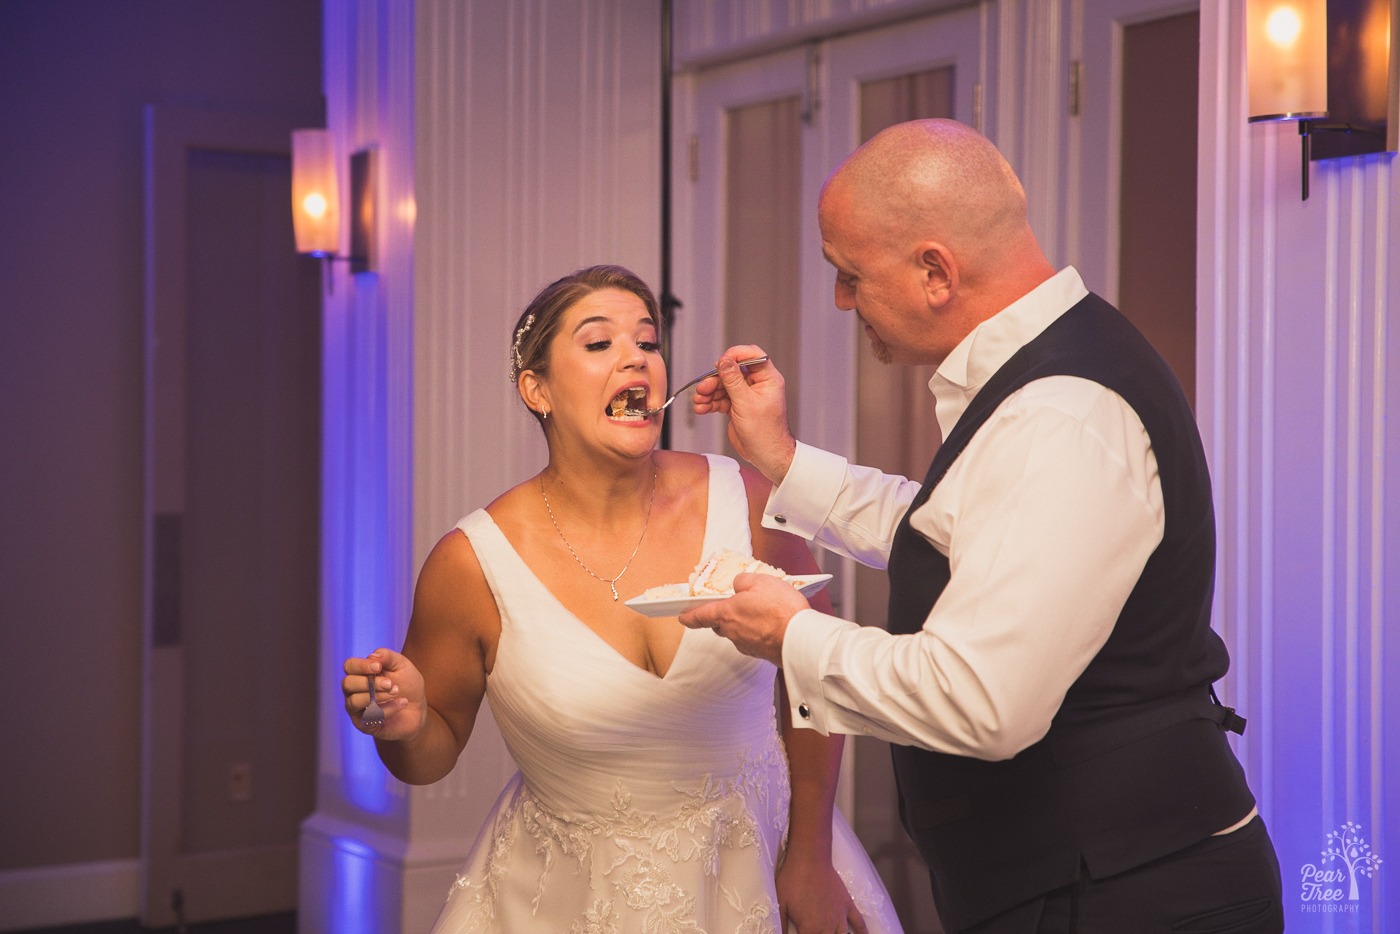 Bride opening her mouth for cake from the groom with a funny expression